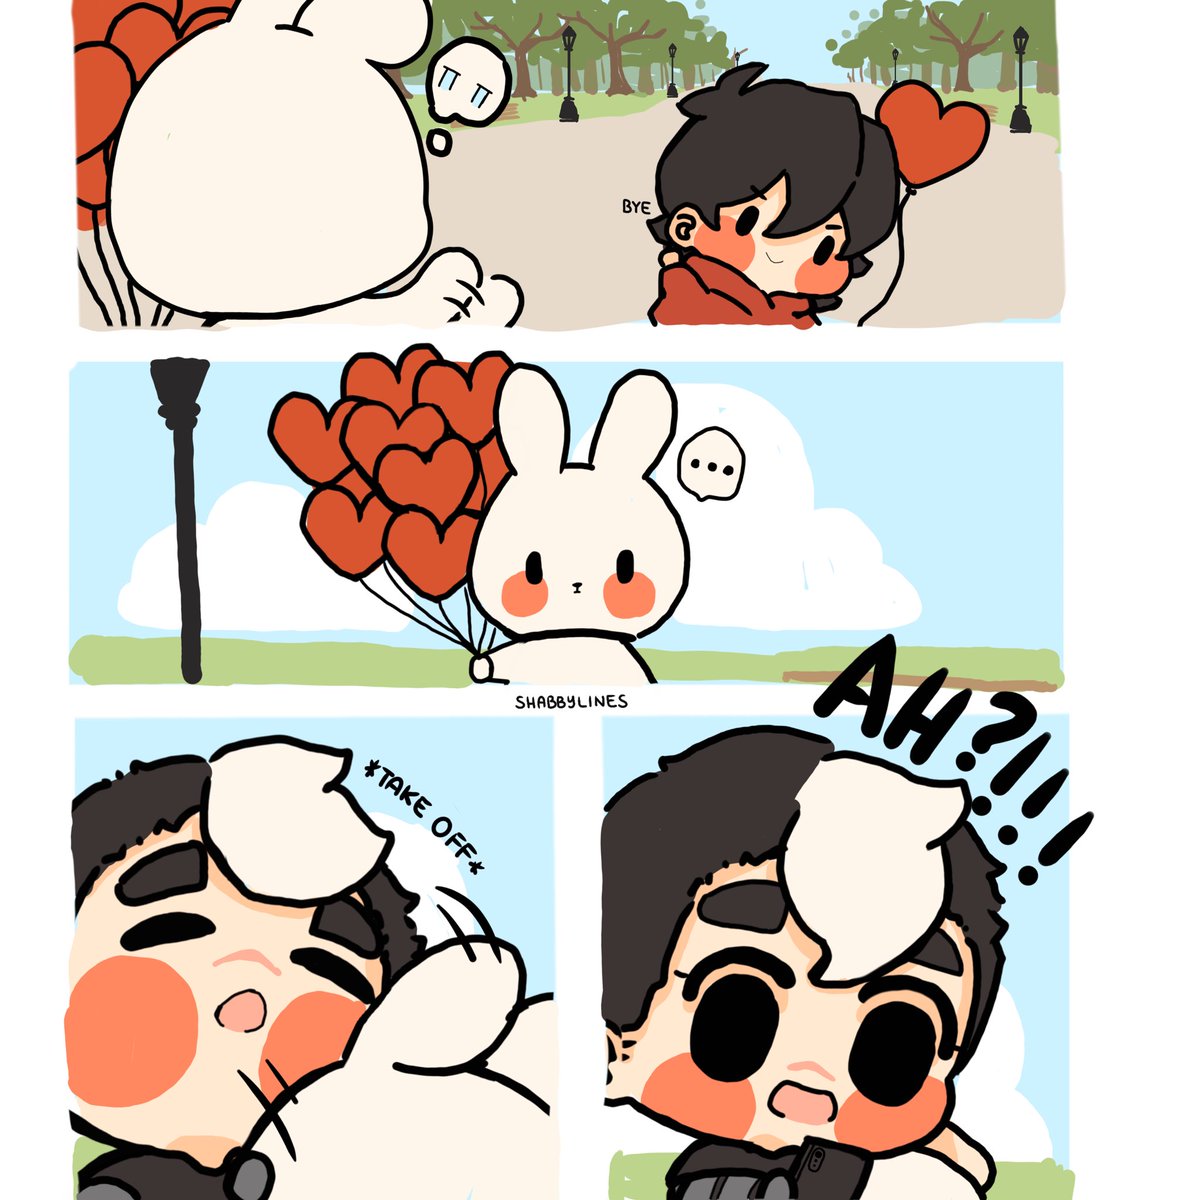 [part 3/?] gasp the bunny is shiro
(also i've decided to extend this and just see where it goes ✨)

#sheith 